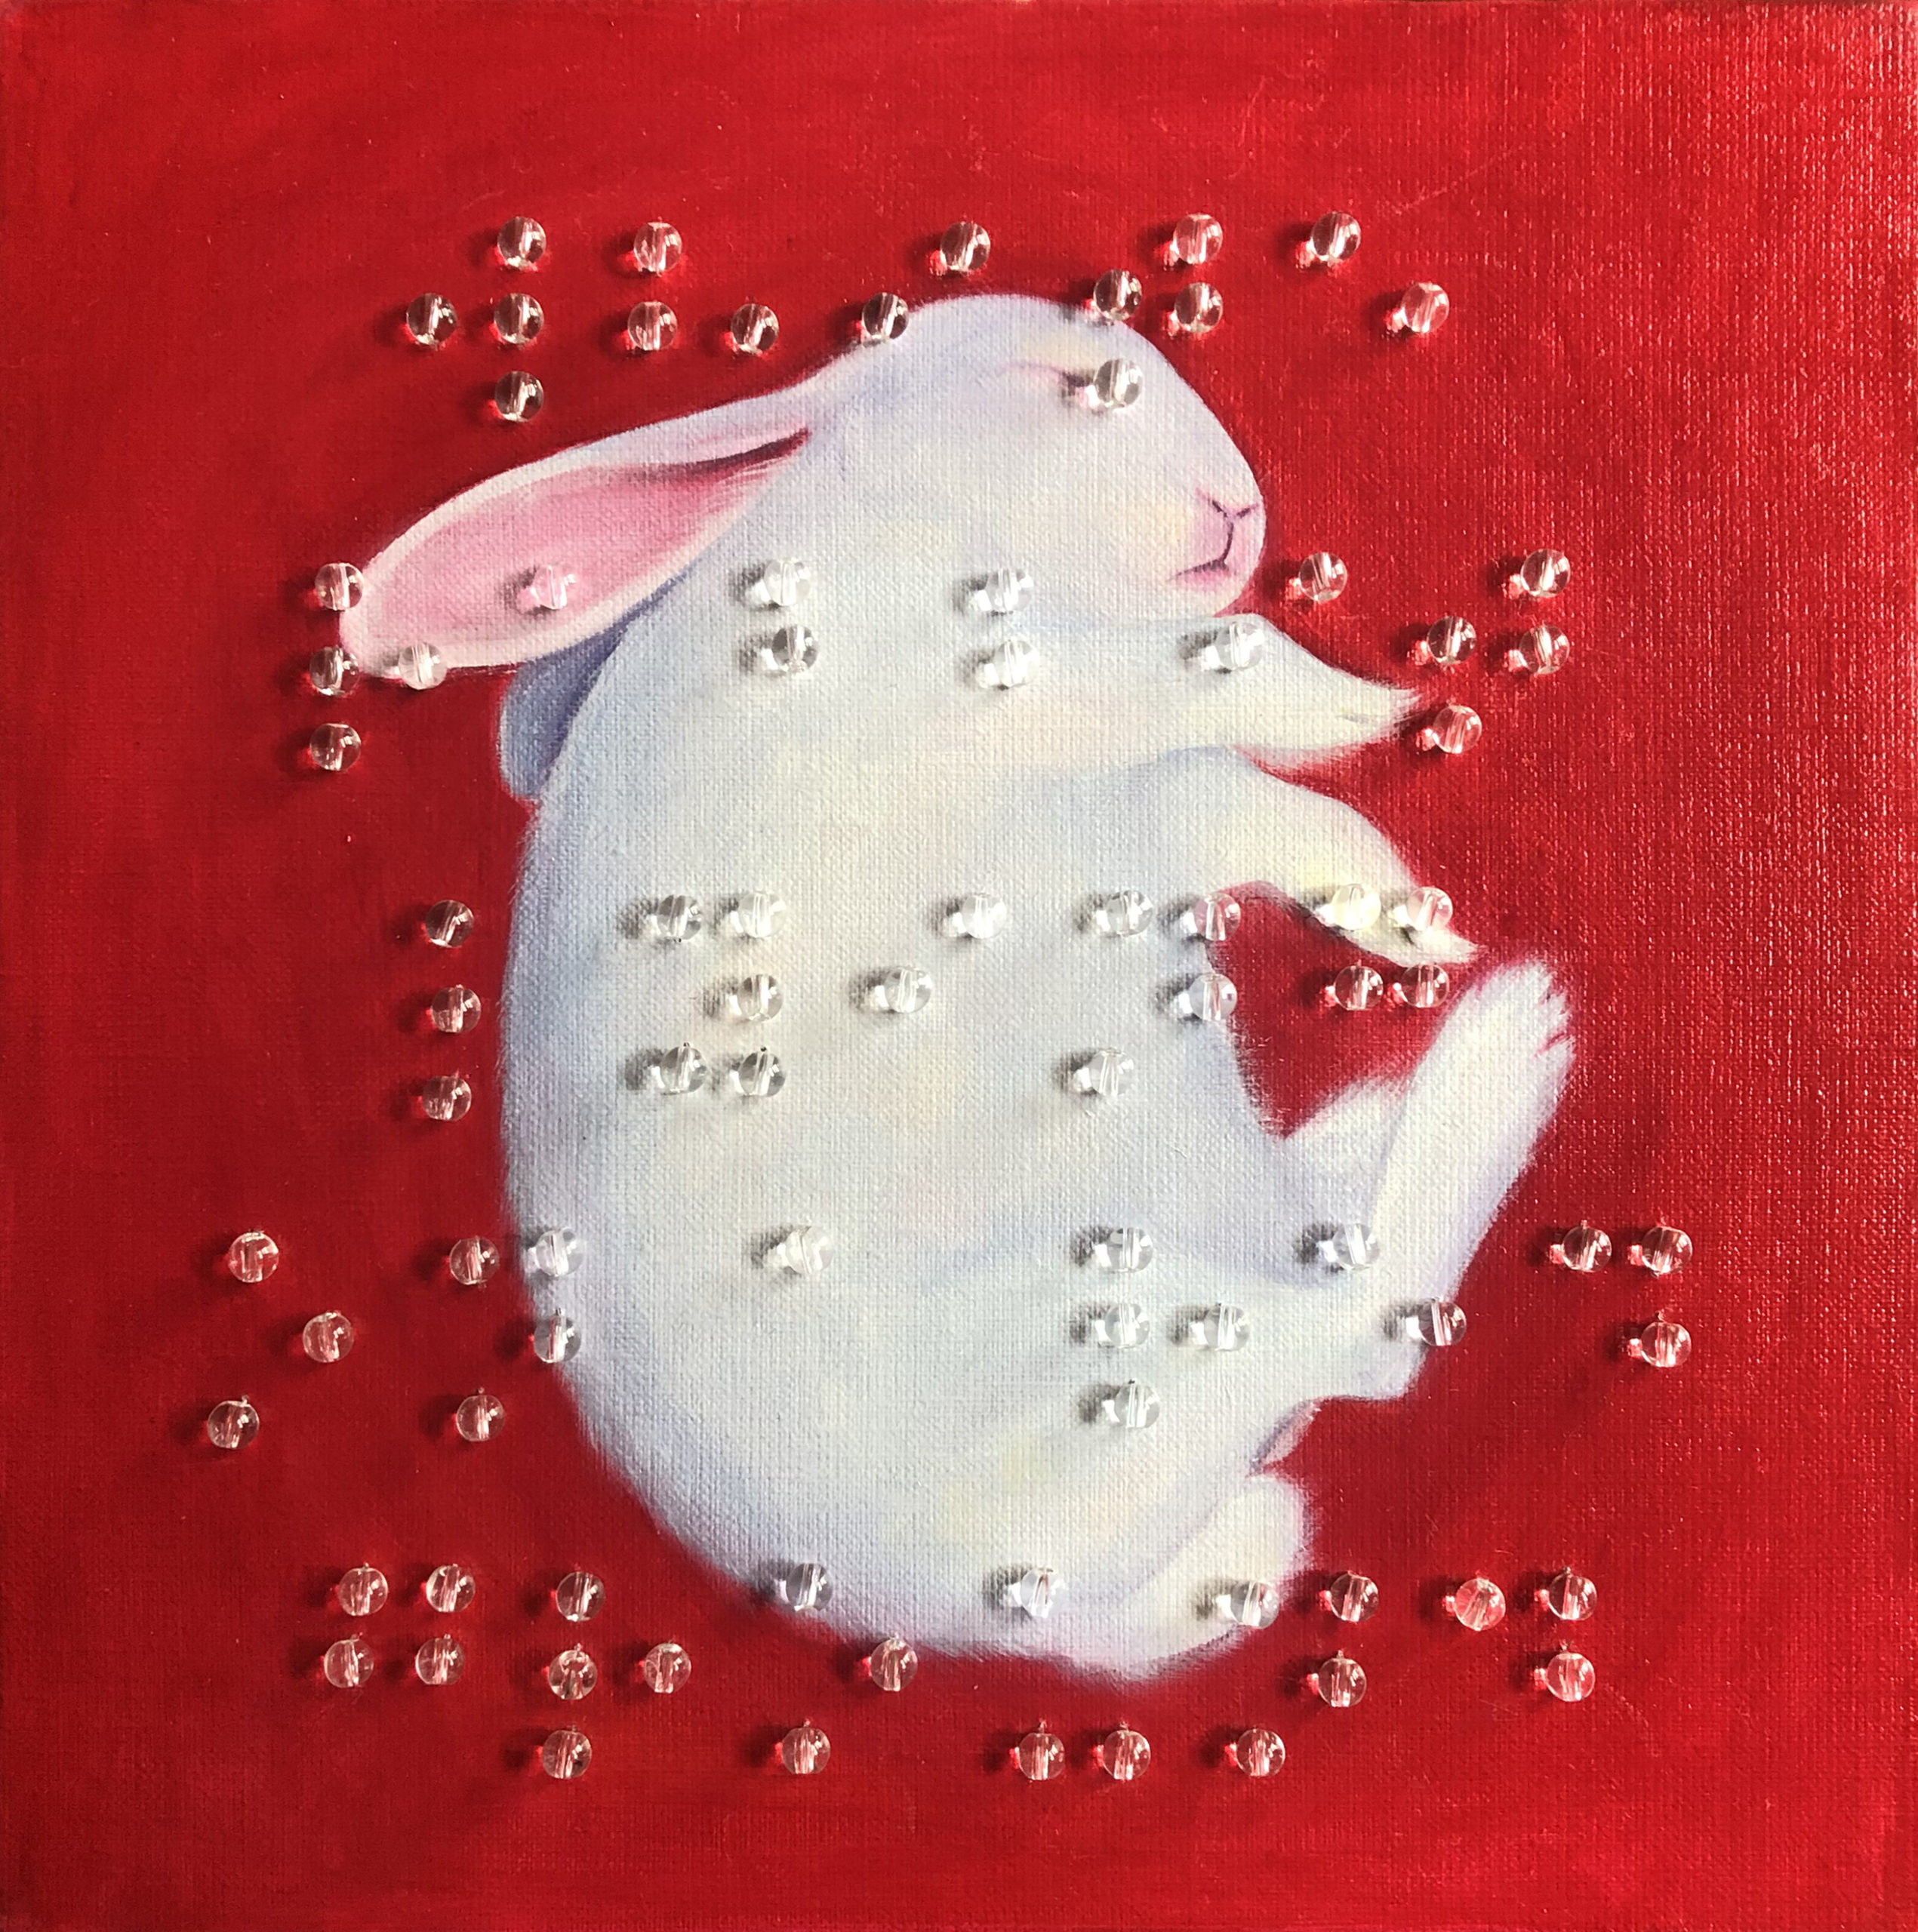 WHITE RABBIT LYING ON A RED GROUND